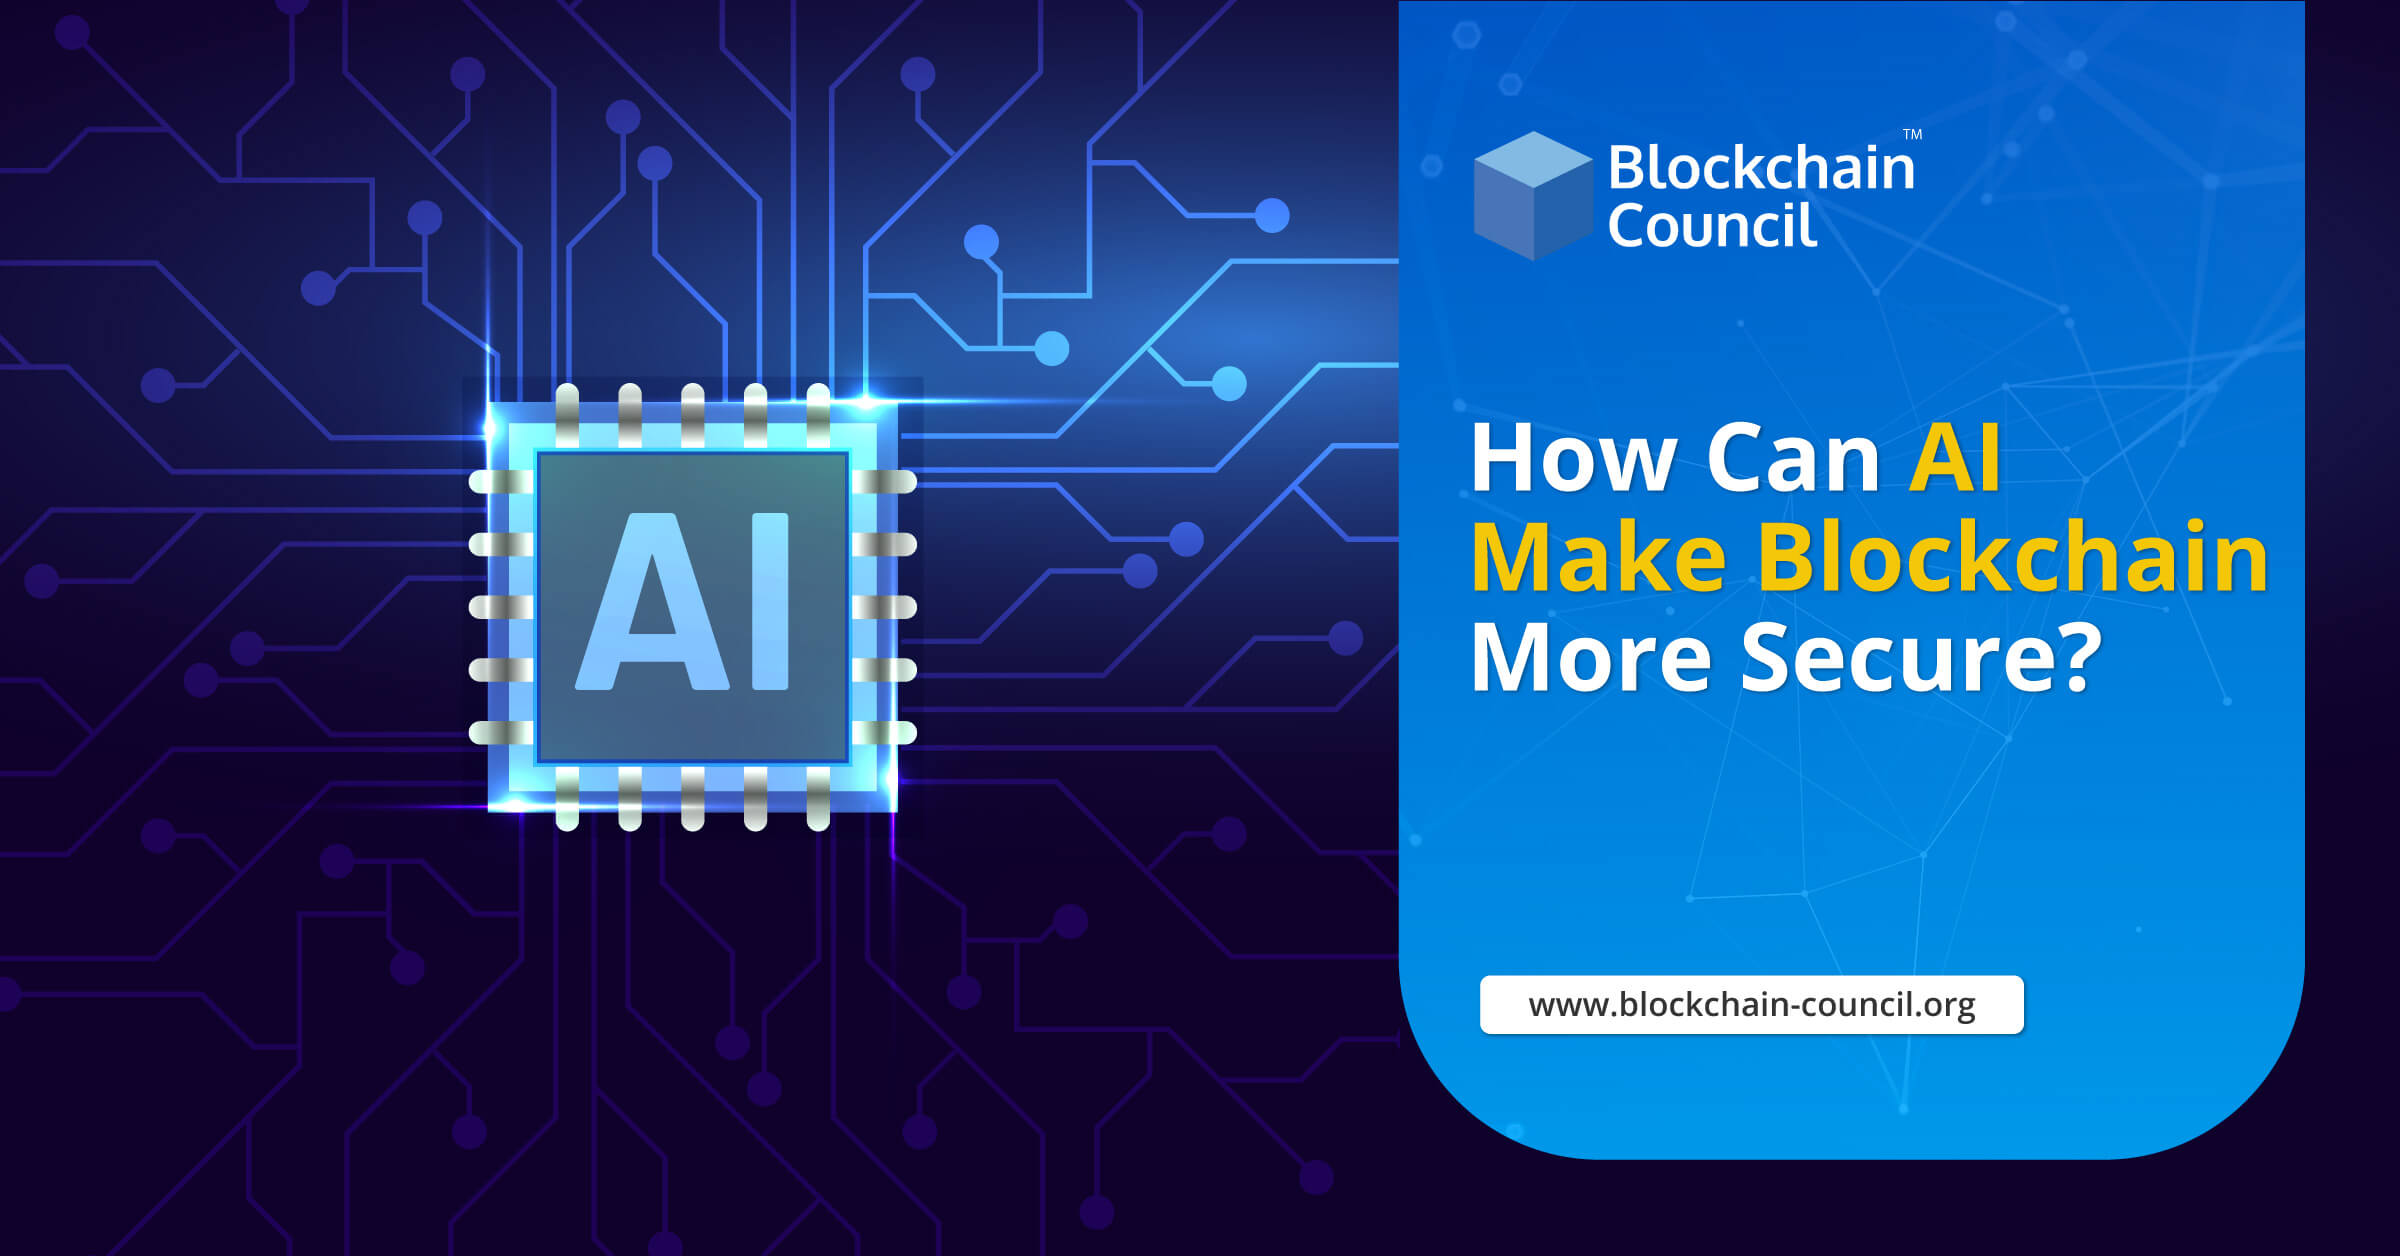 How Can AI Make Blockchain More Secure?